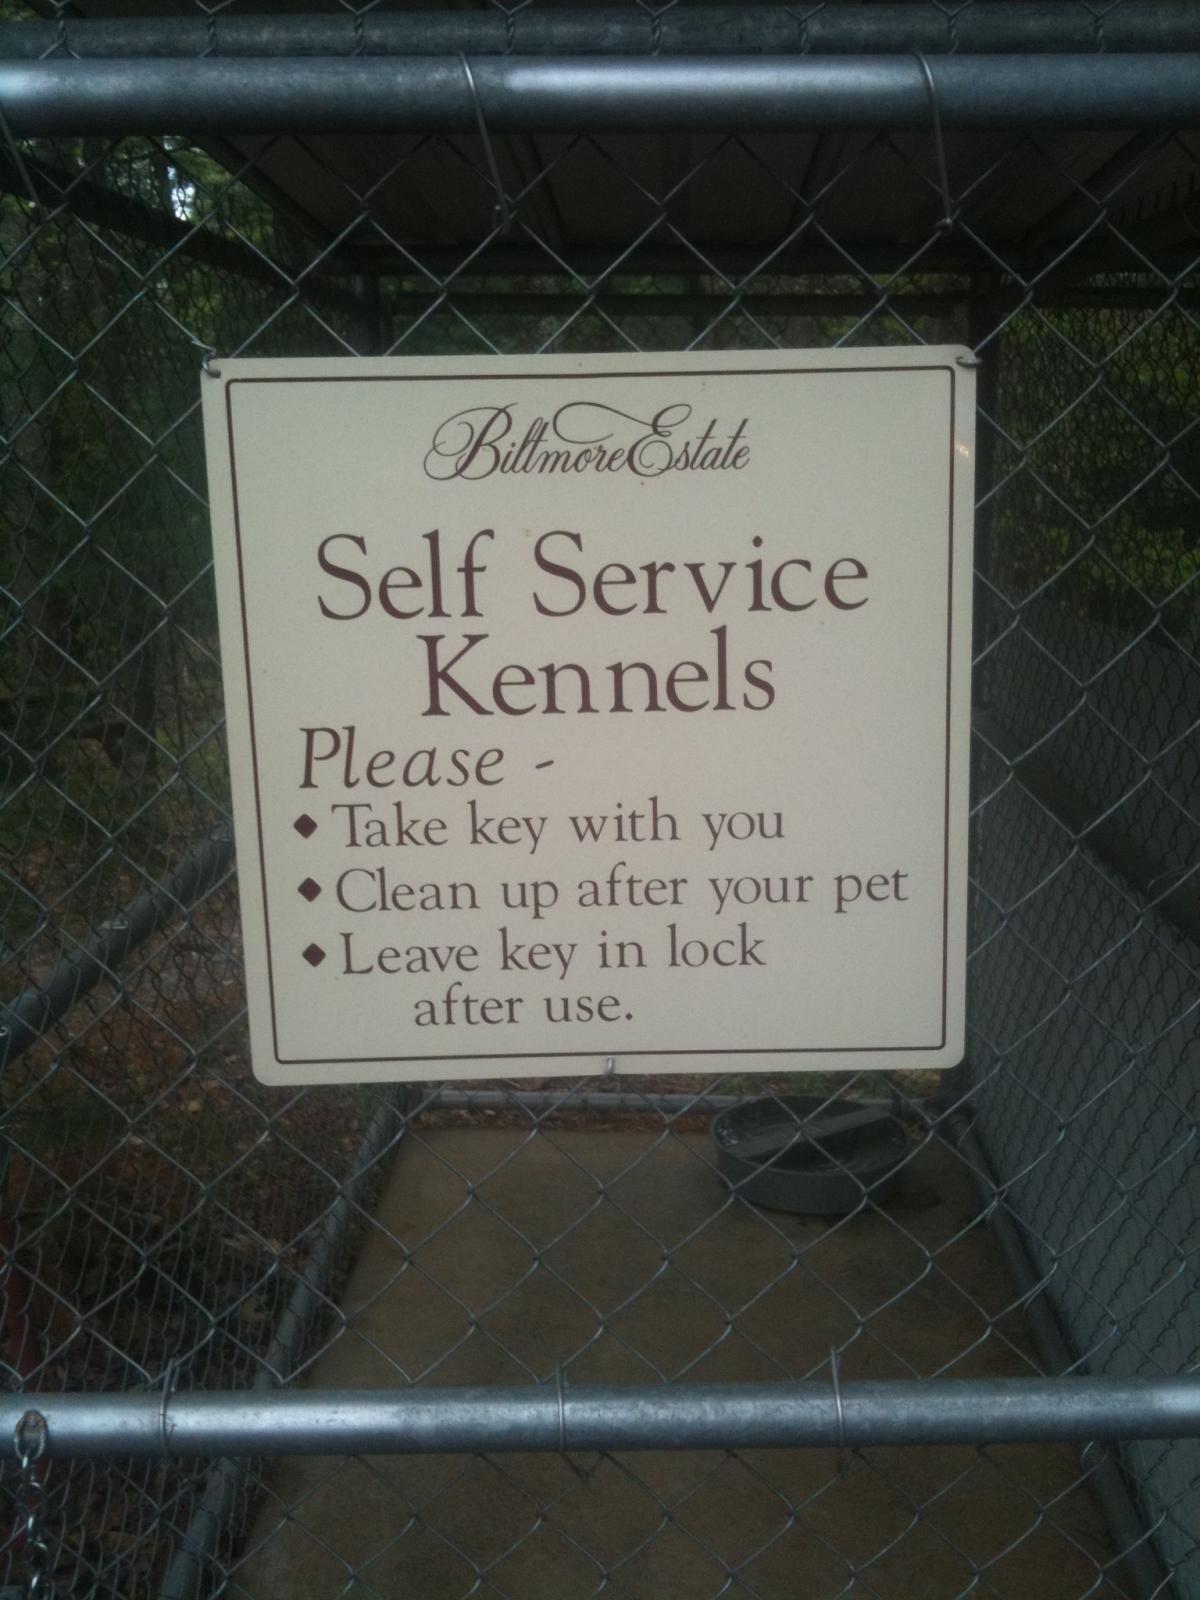 A dog-friendly sign promoting self-service kennels.